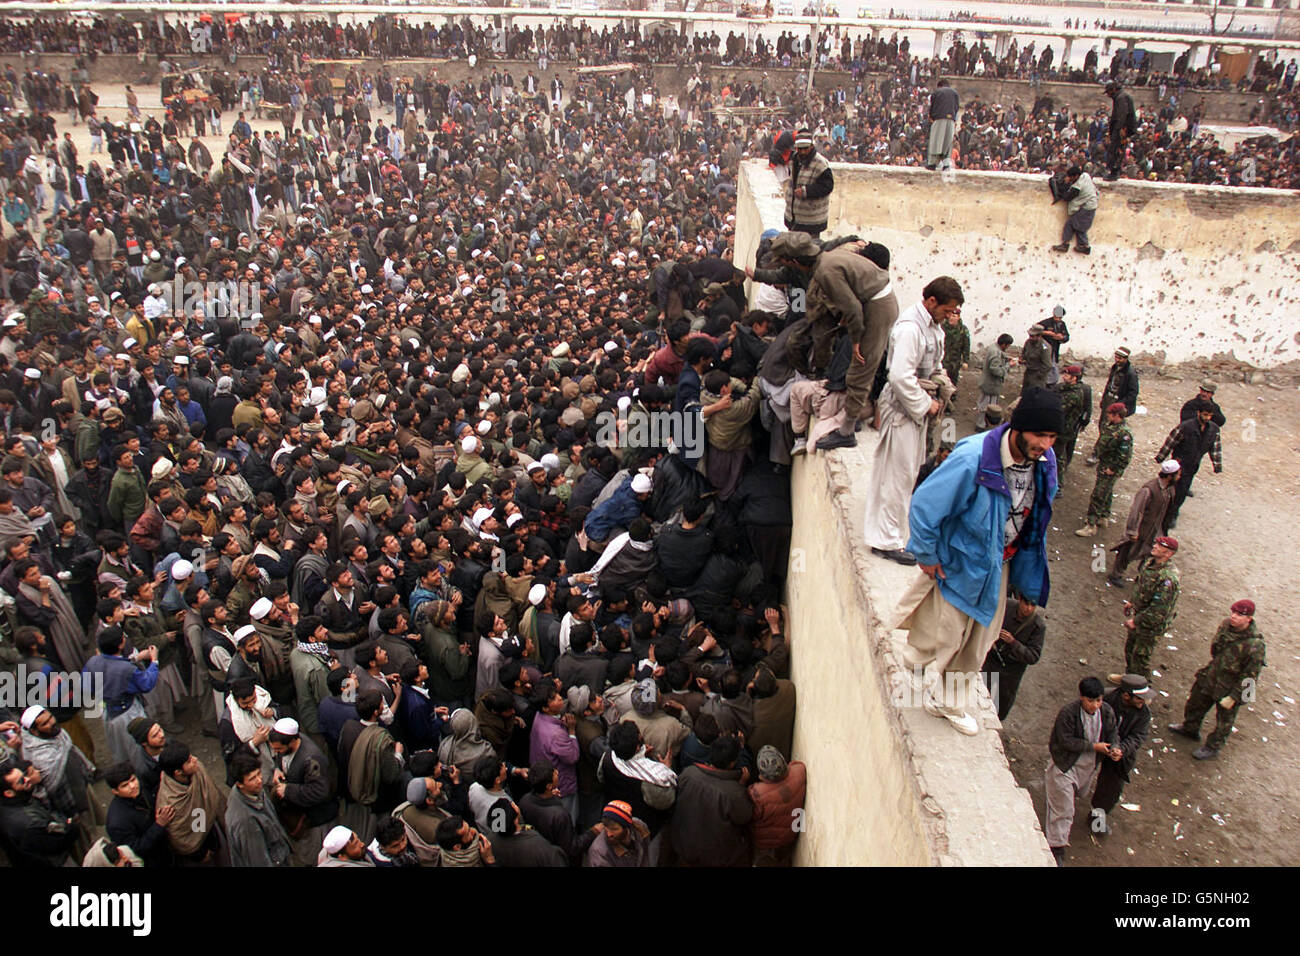 Afghan Crowd trouble Stock Photo